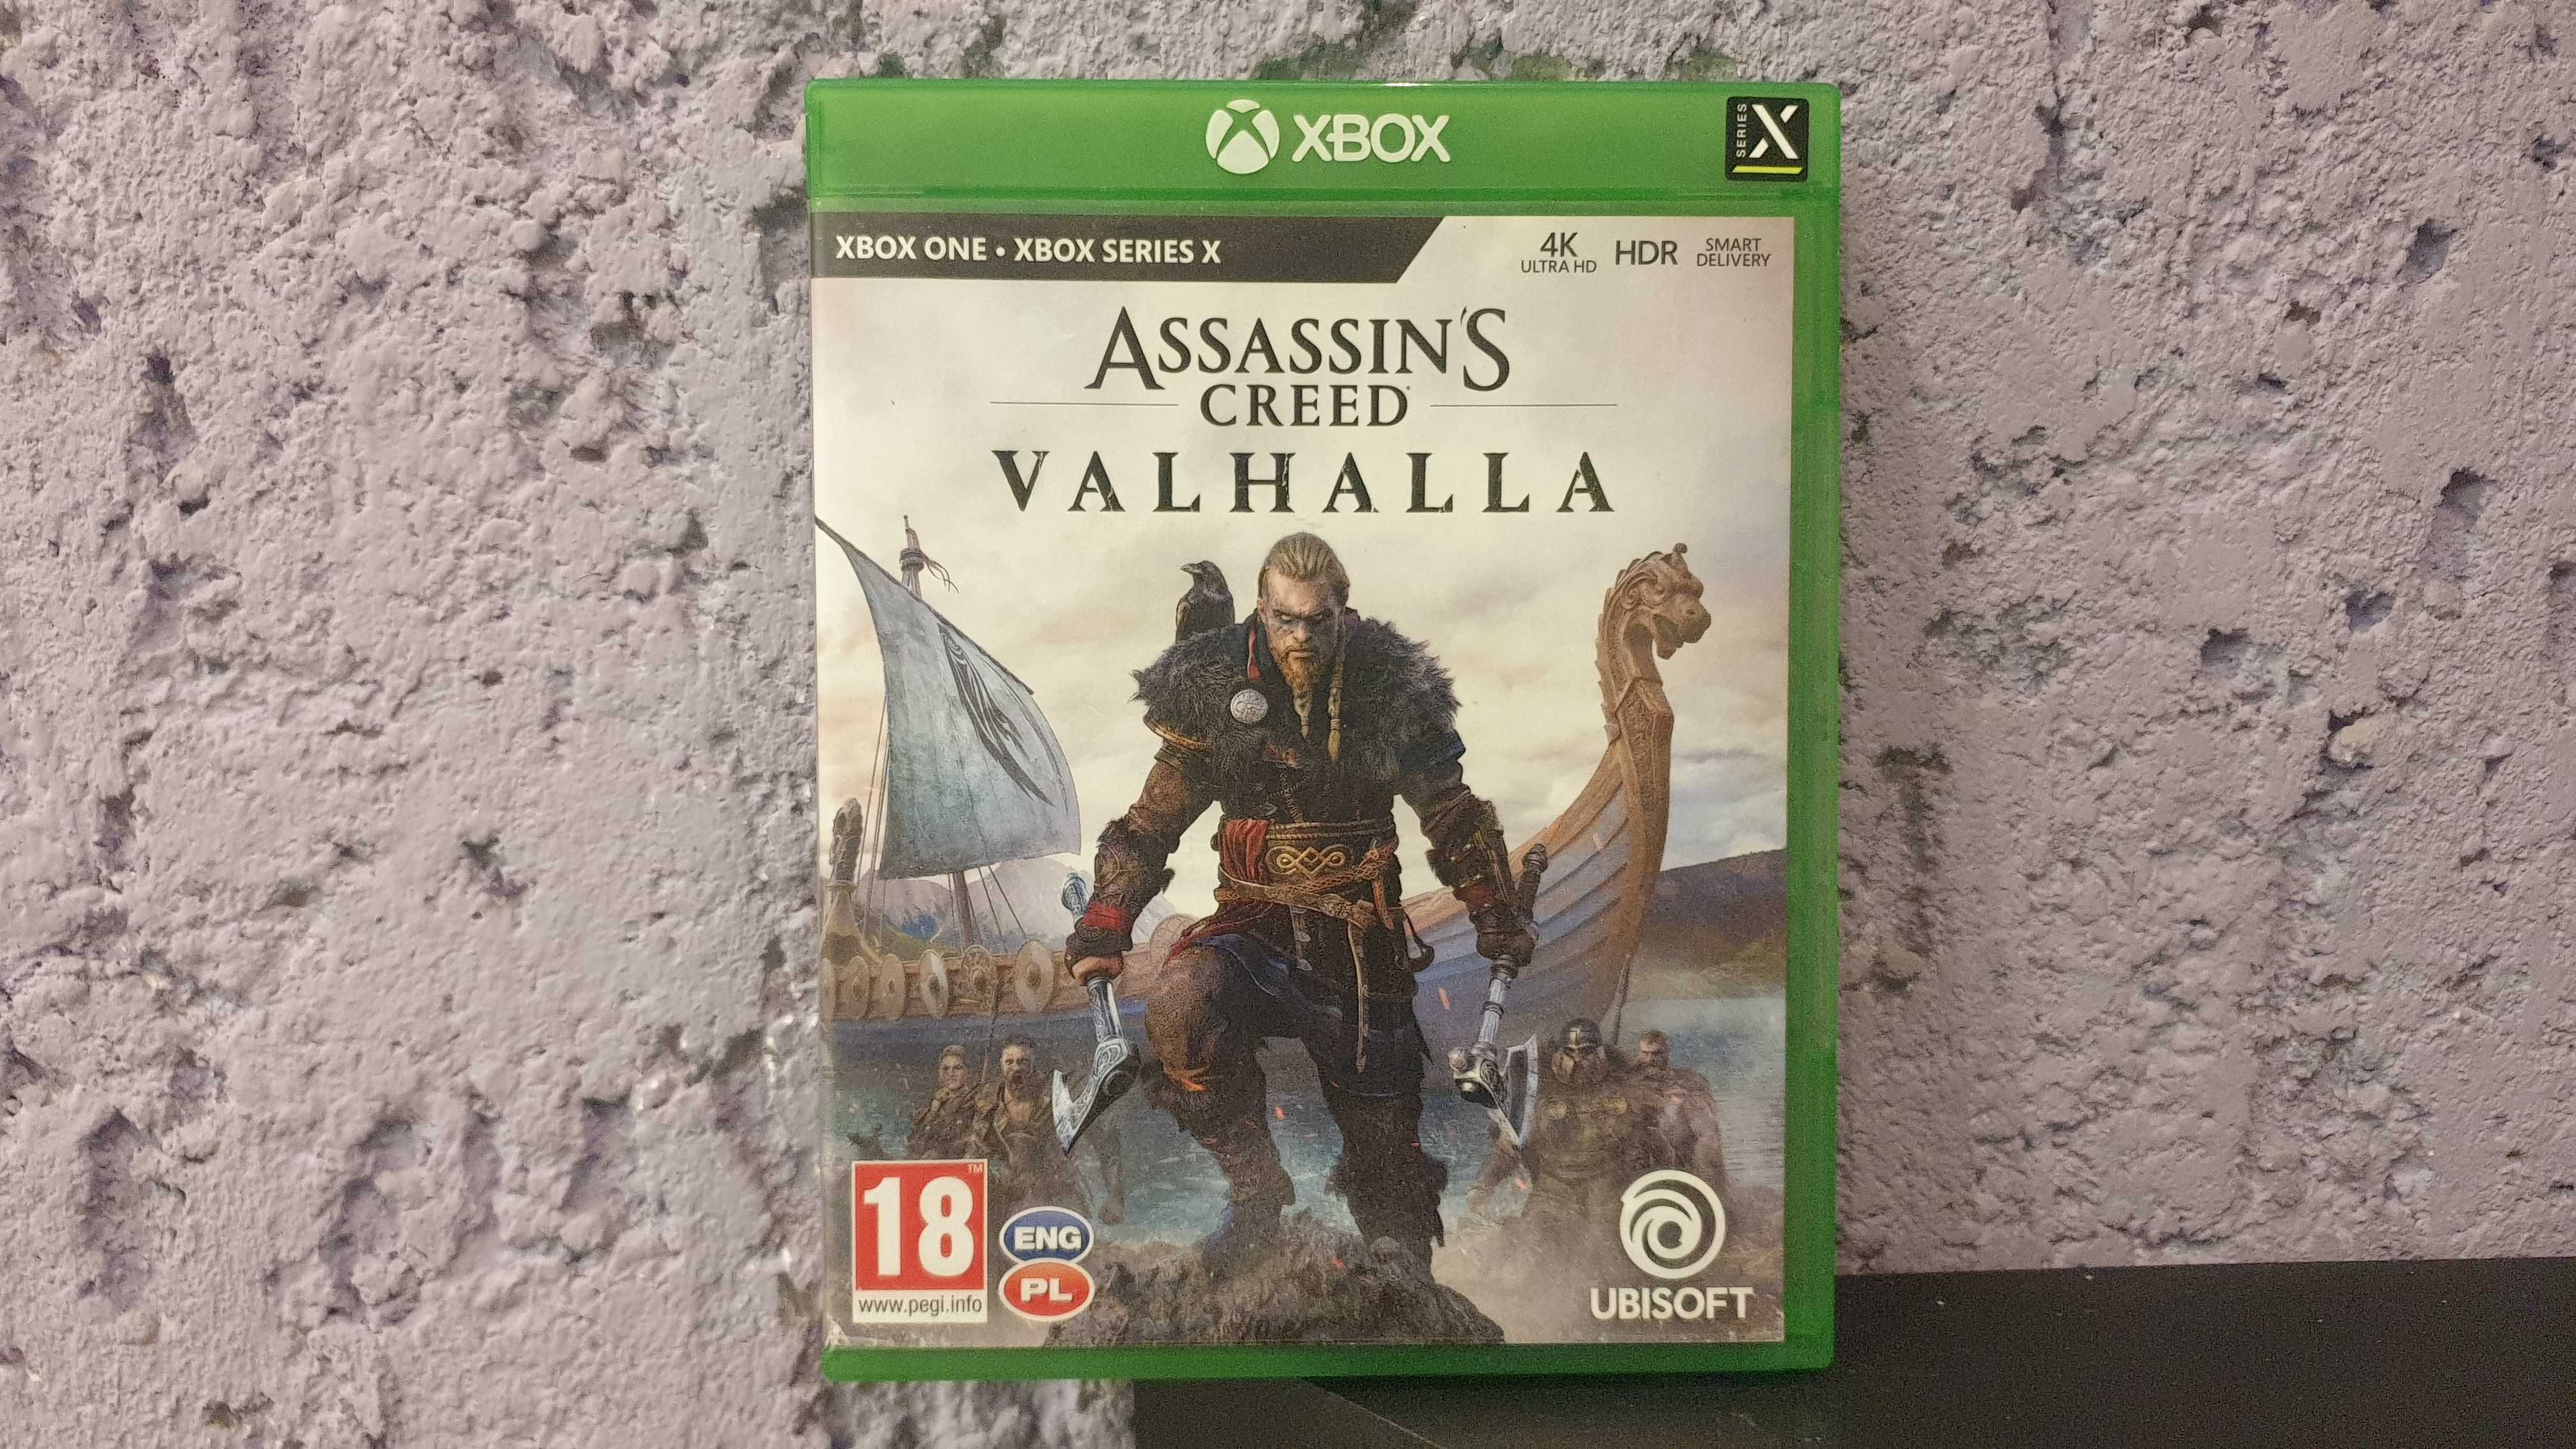 Assassin's Creed Valhalla / XBOX ONE / Series X / PL